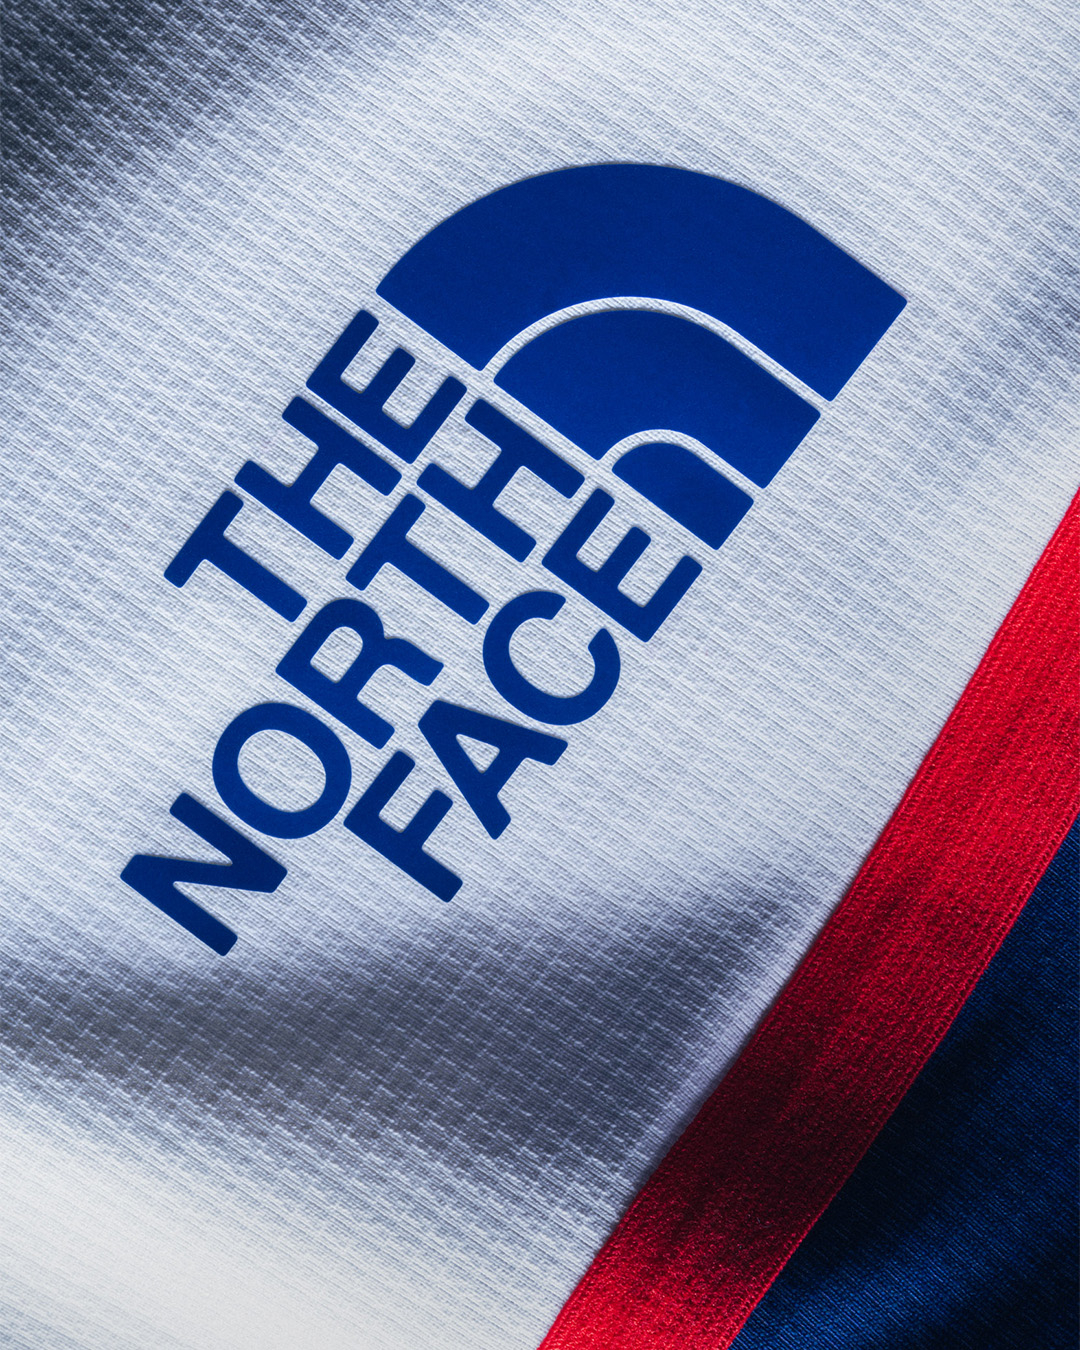 Close-up of The North Face logo on textured fabric with red and blue color accents